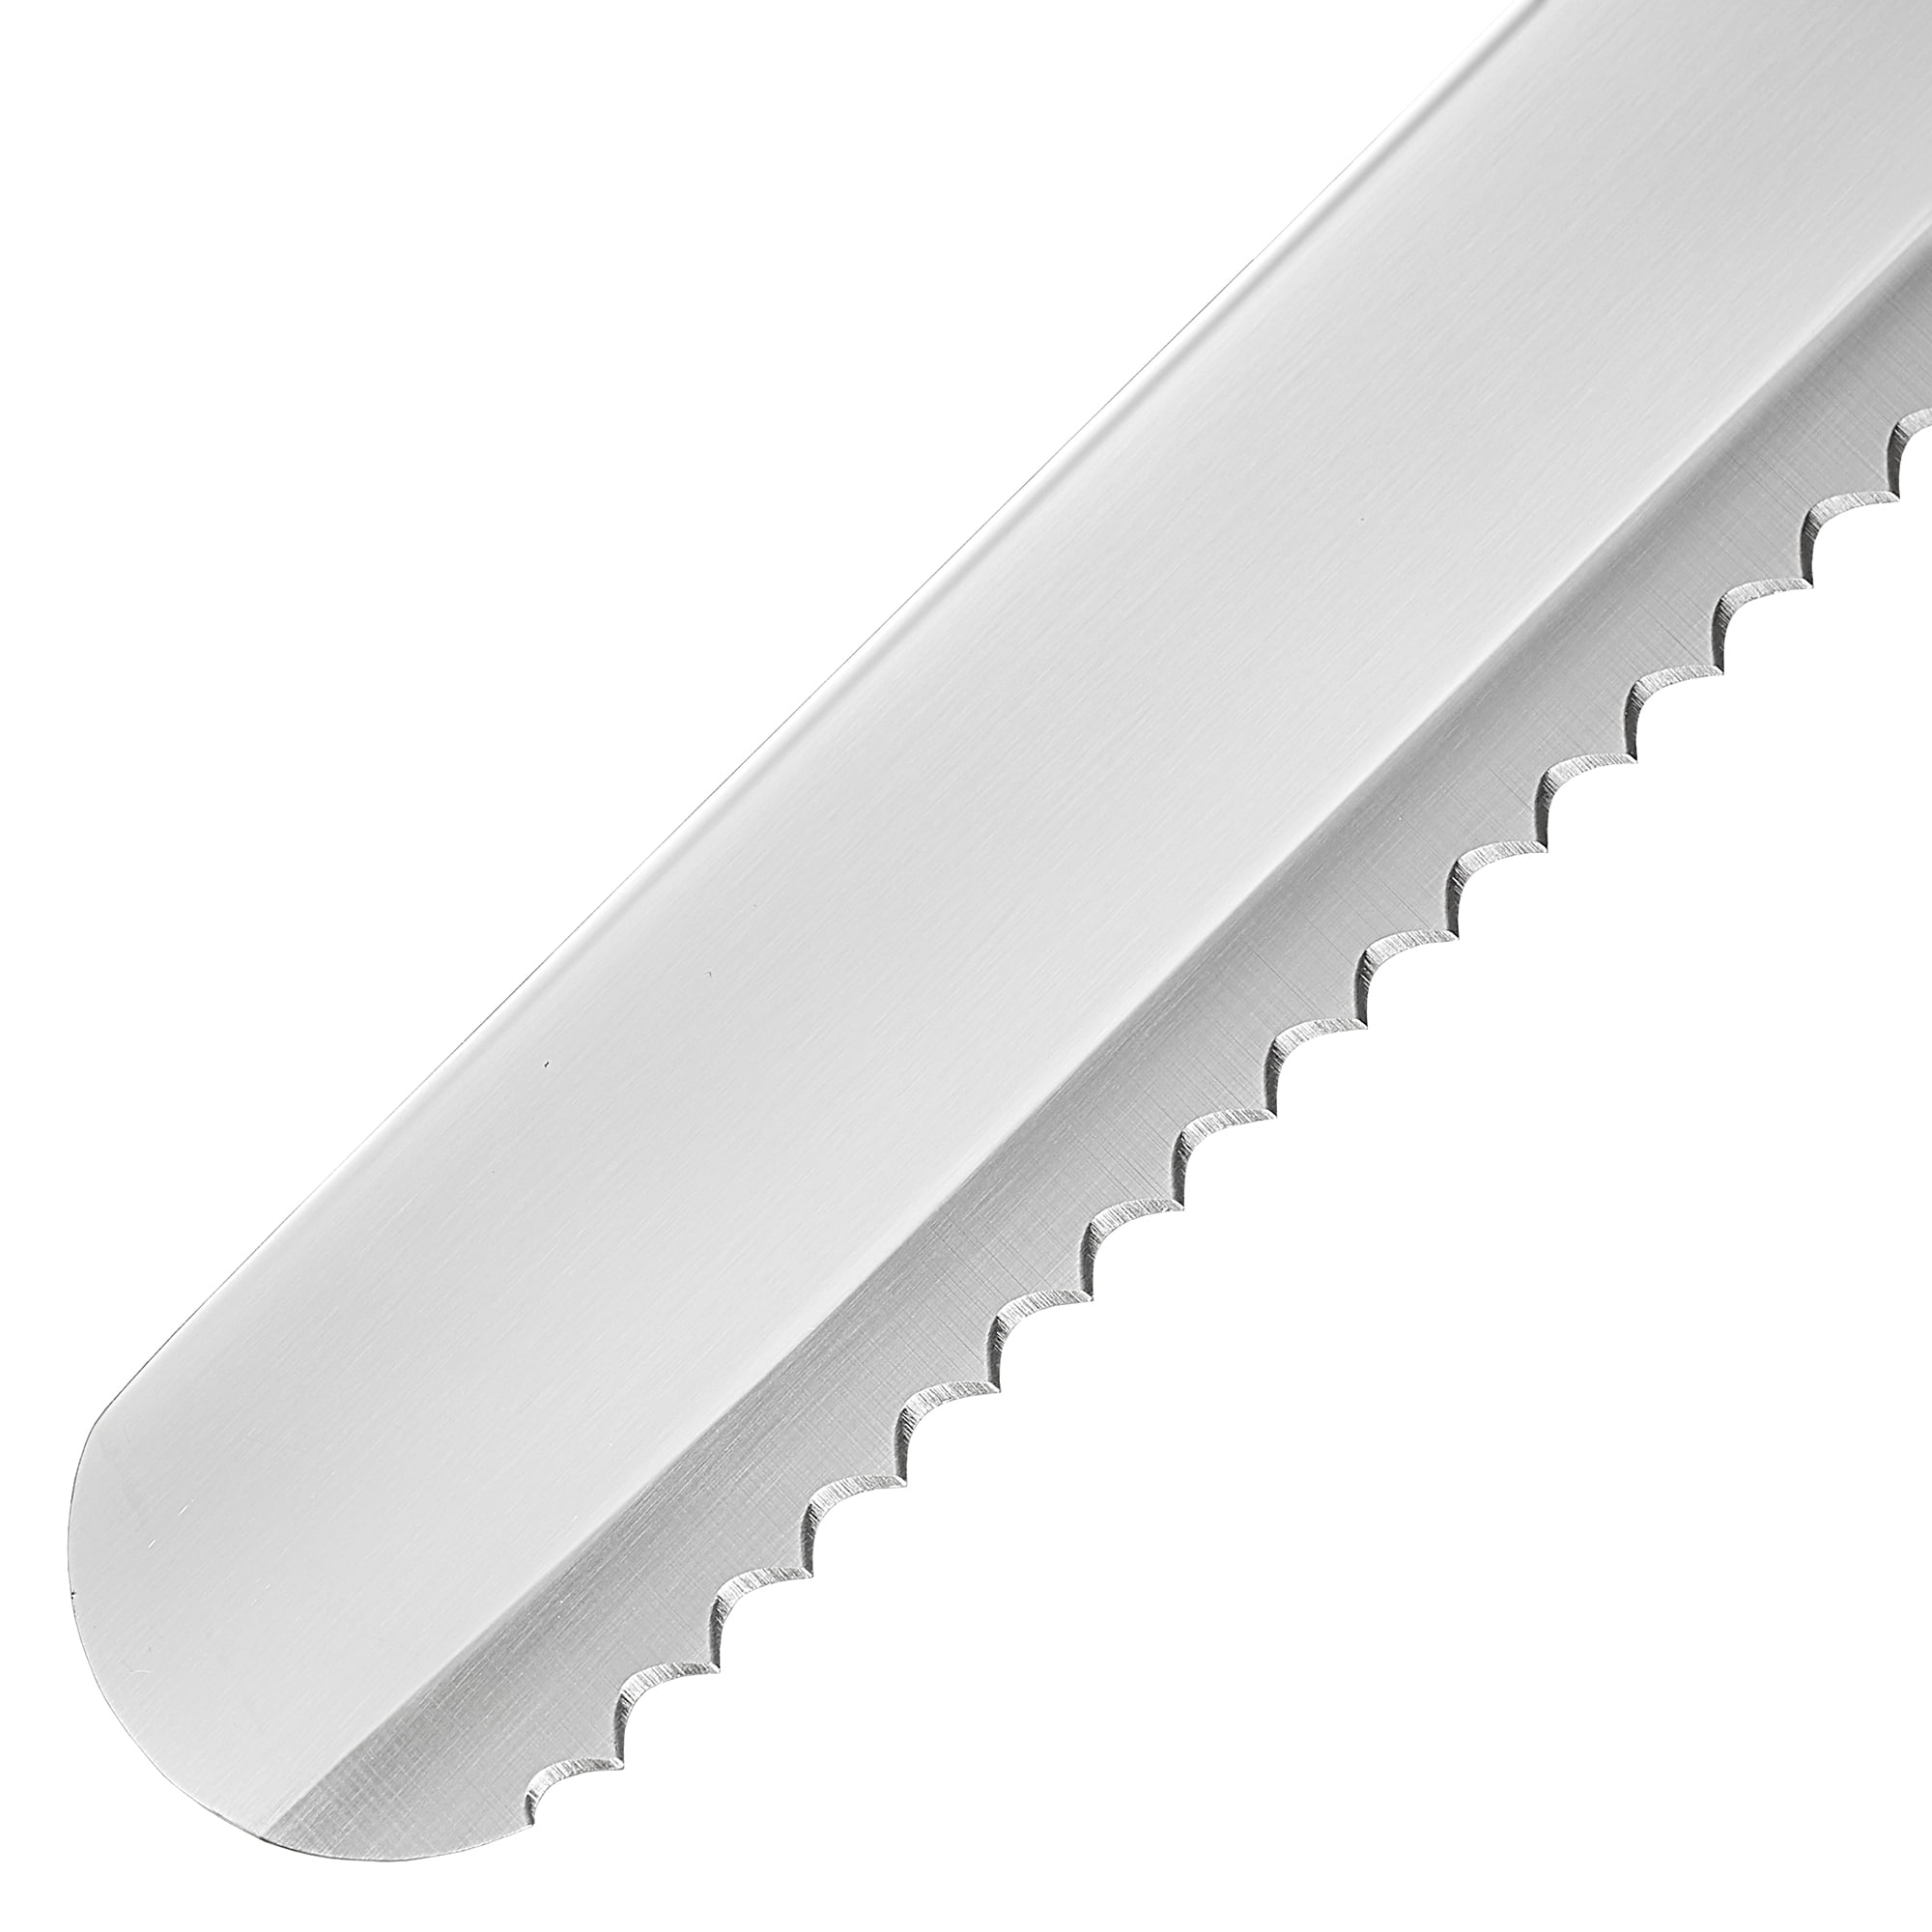 Professional 14 Stainless Steel Non-Serrated Cake Knife - the Ultimat –  Nonna Live